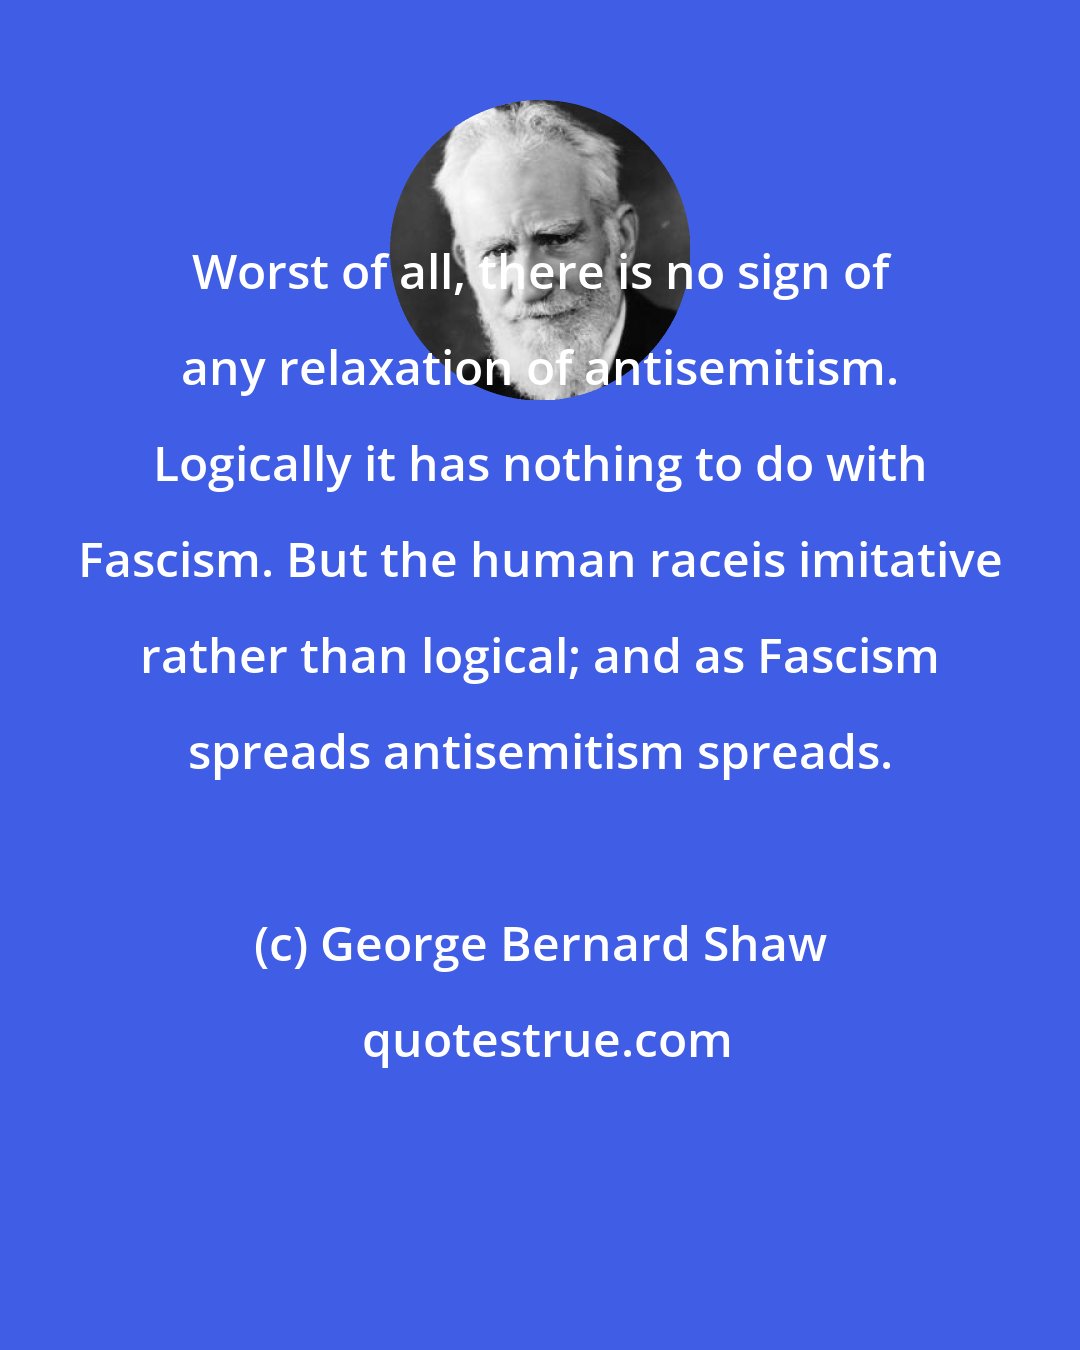 George Bernard Shaw: Worst of all, there is no sign of any relaxation of antisemitism. Logically it has nothing to do with Fascism. But the human raceis imitative rather than logical; and as Fascism spreads antisemitism spreads.